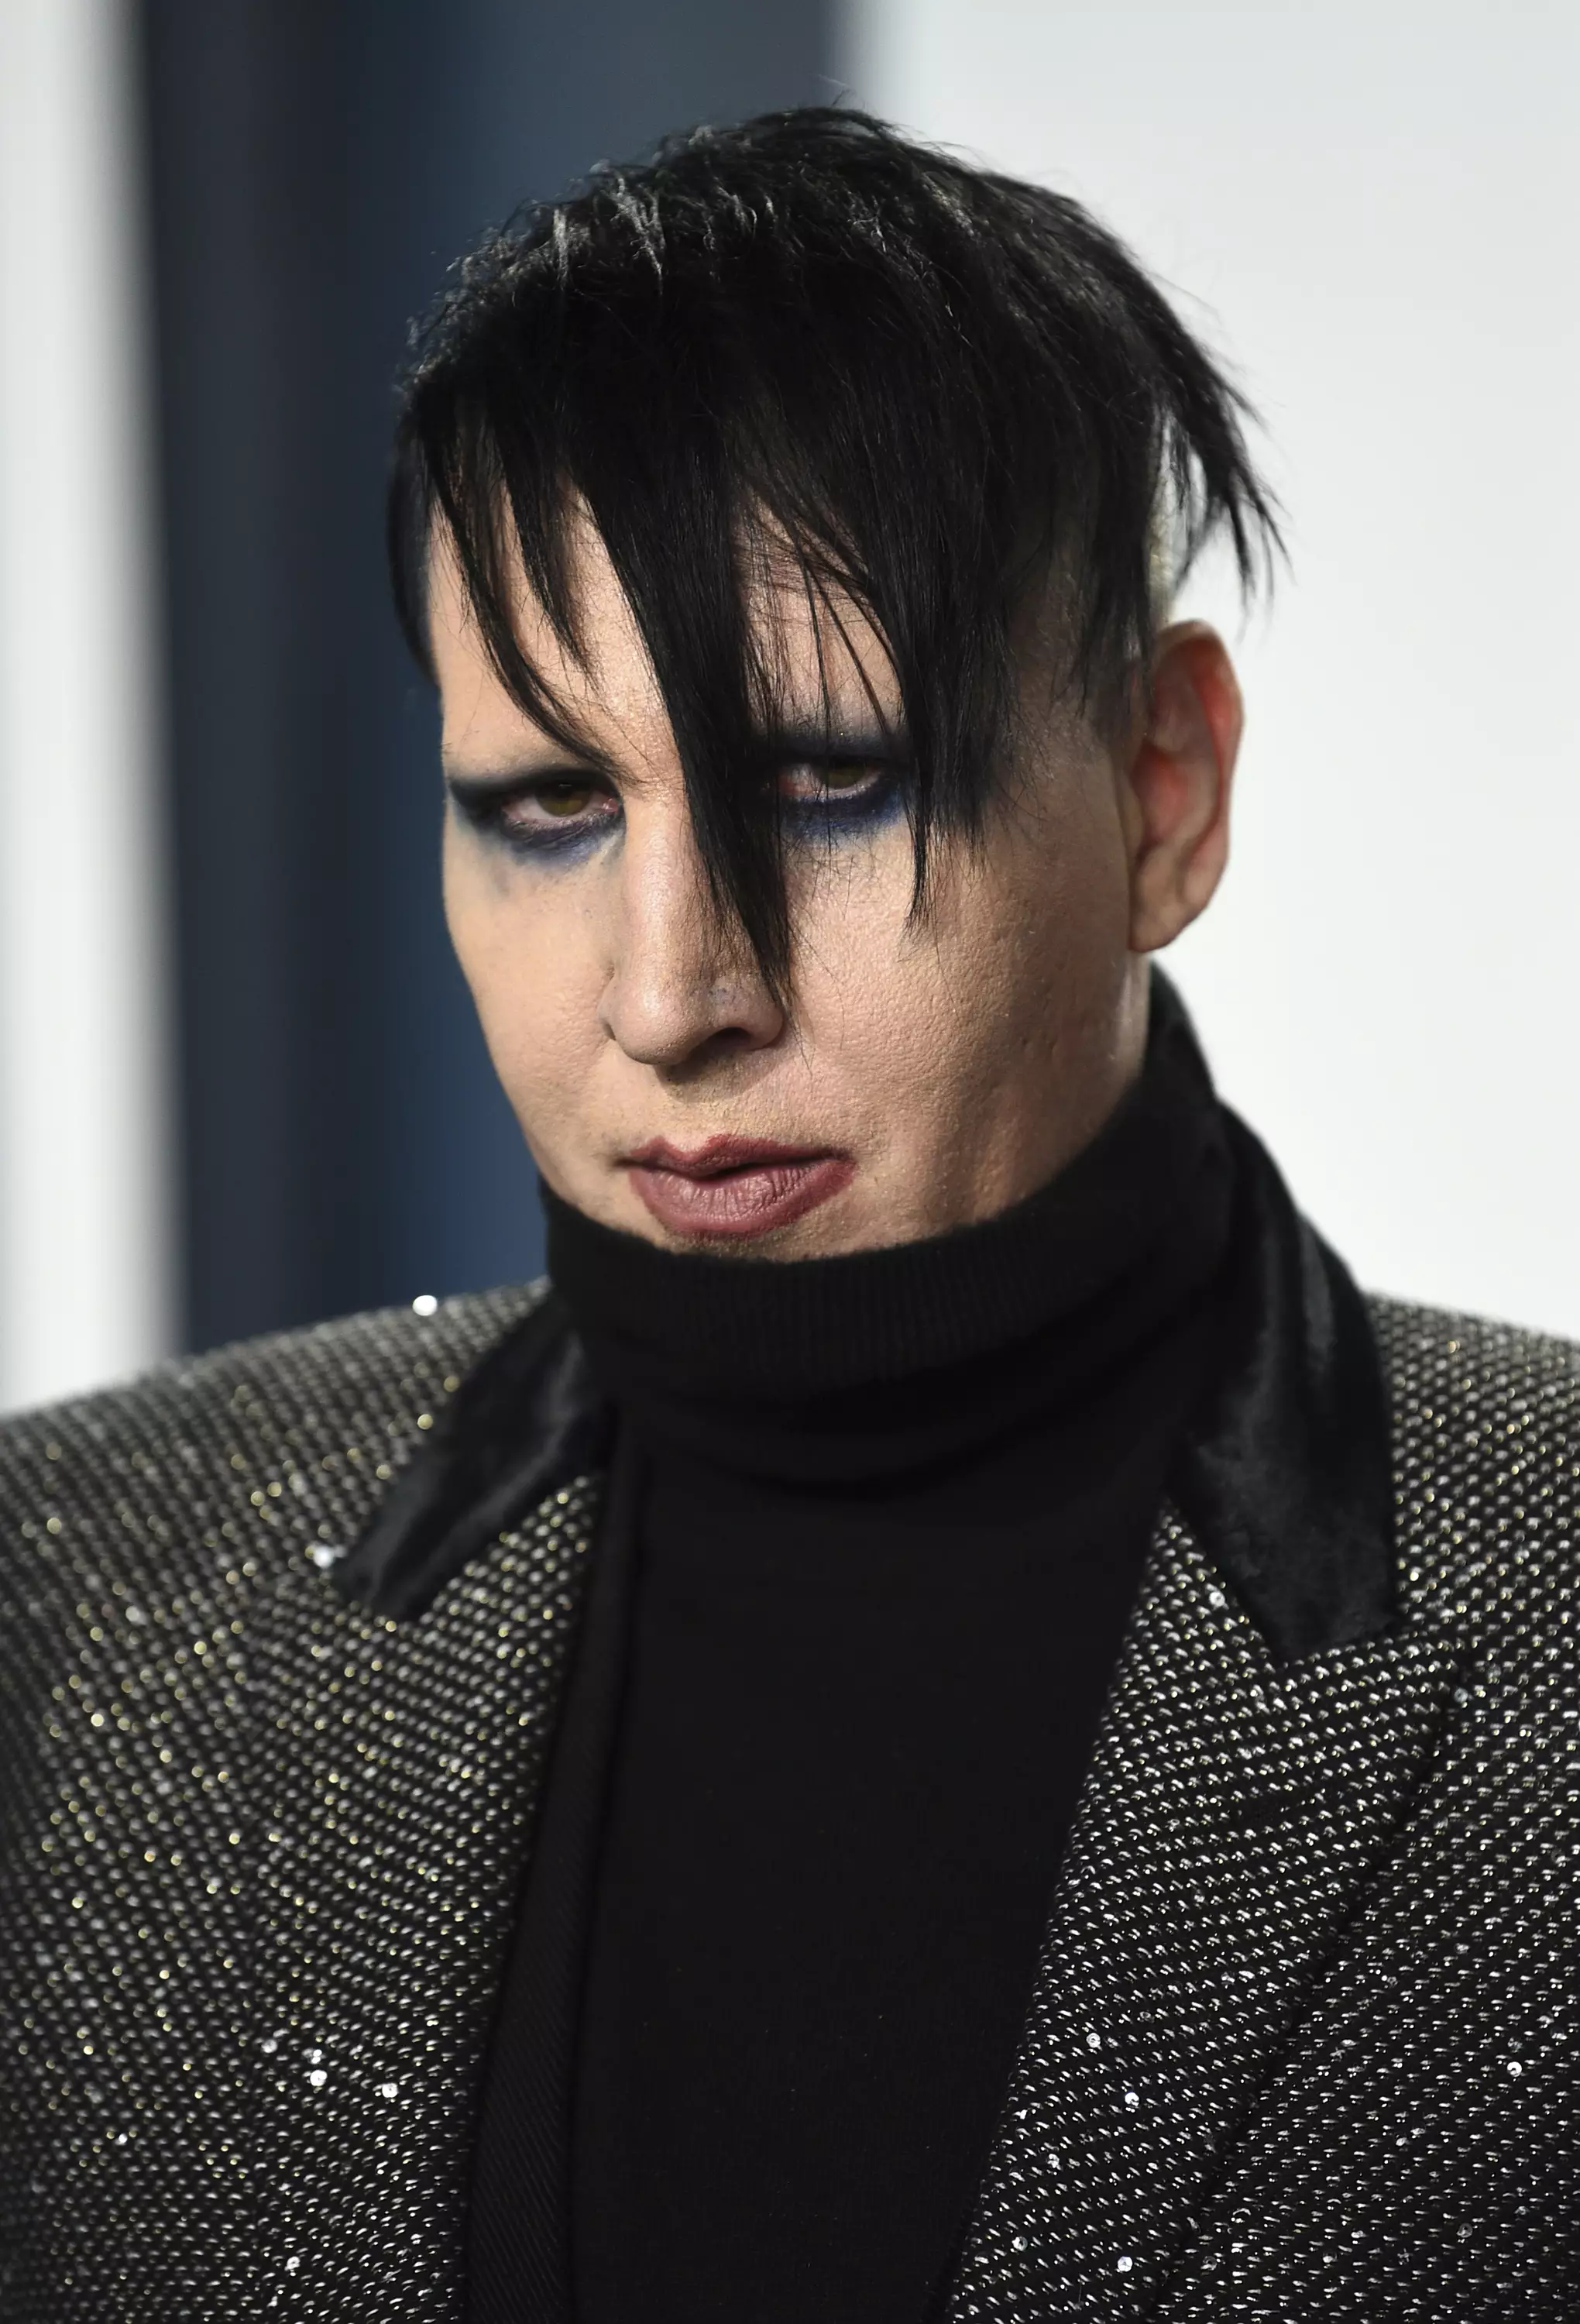 Manson has denied any wrongdoing against Wood and other women (